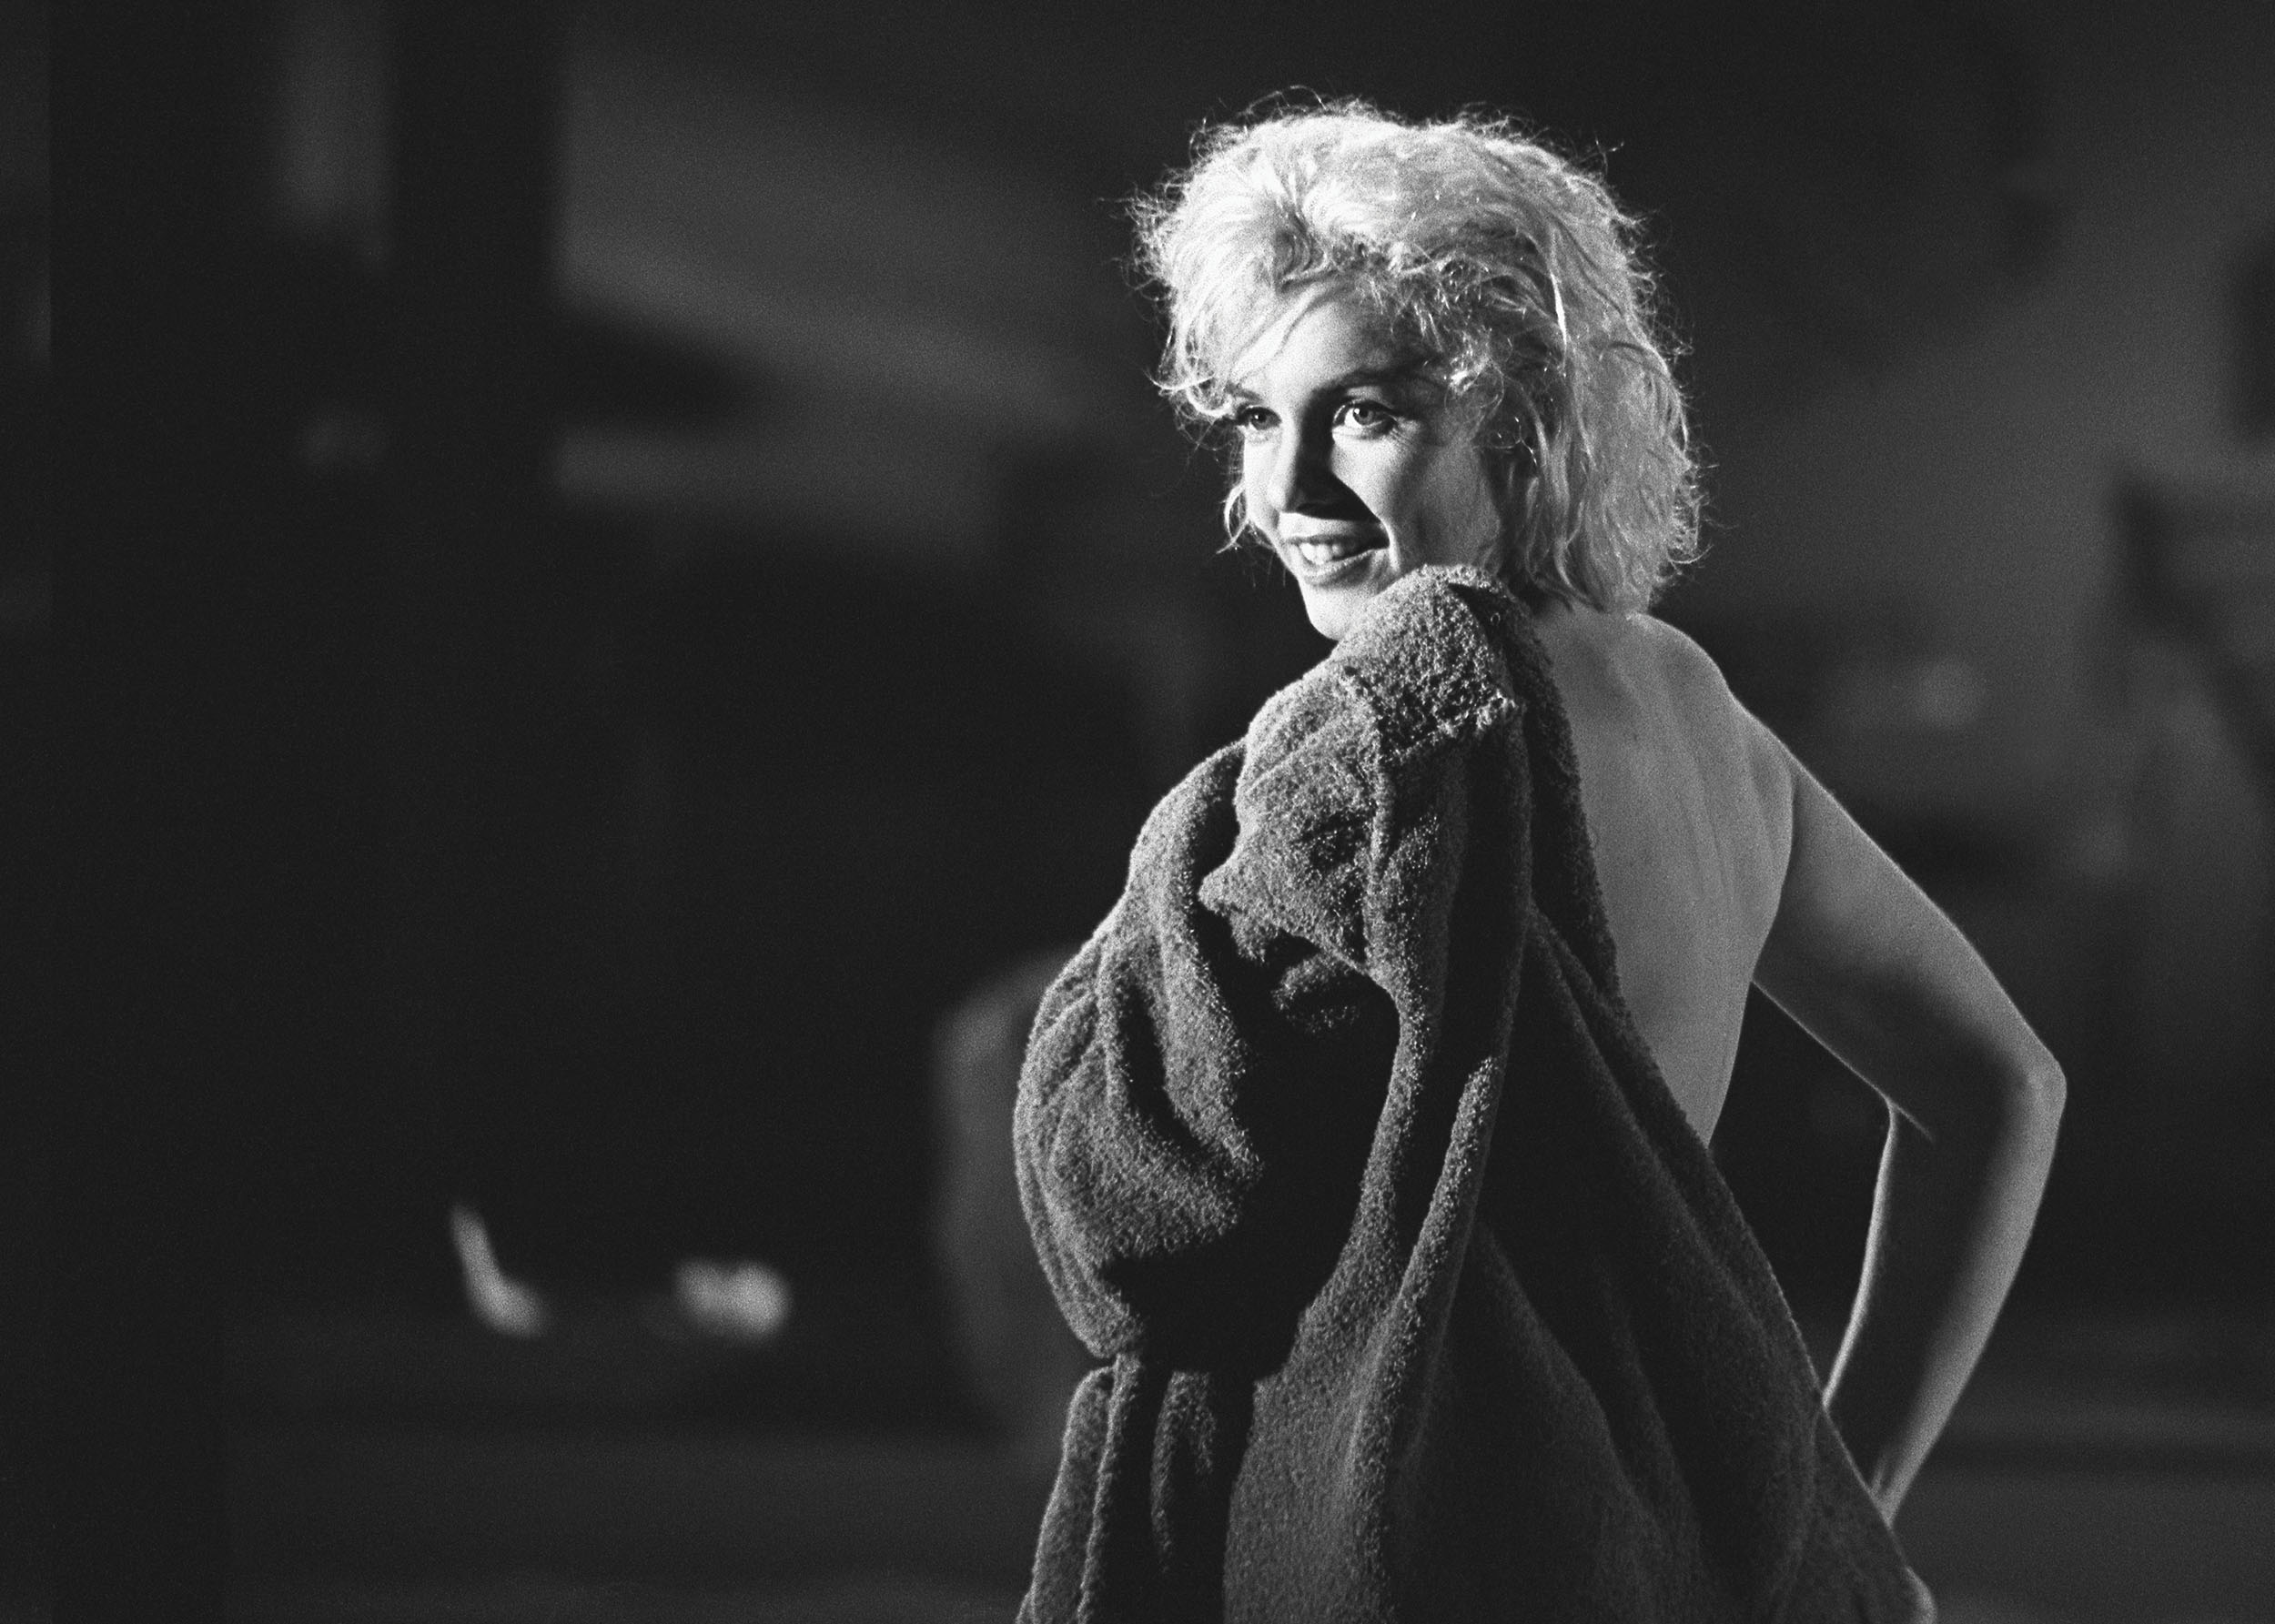 Marilyn Monroe Photograph Putting on a Robe by Lawrence Schiller, 22/75